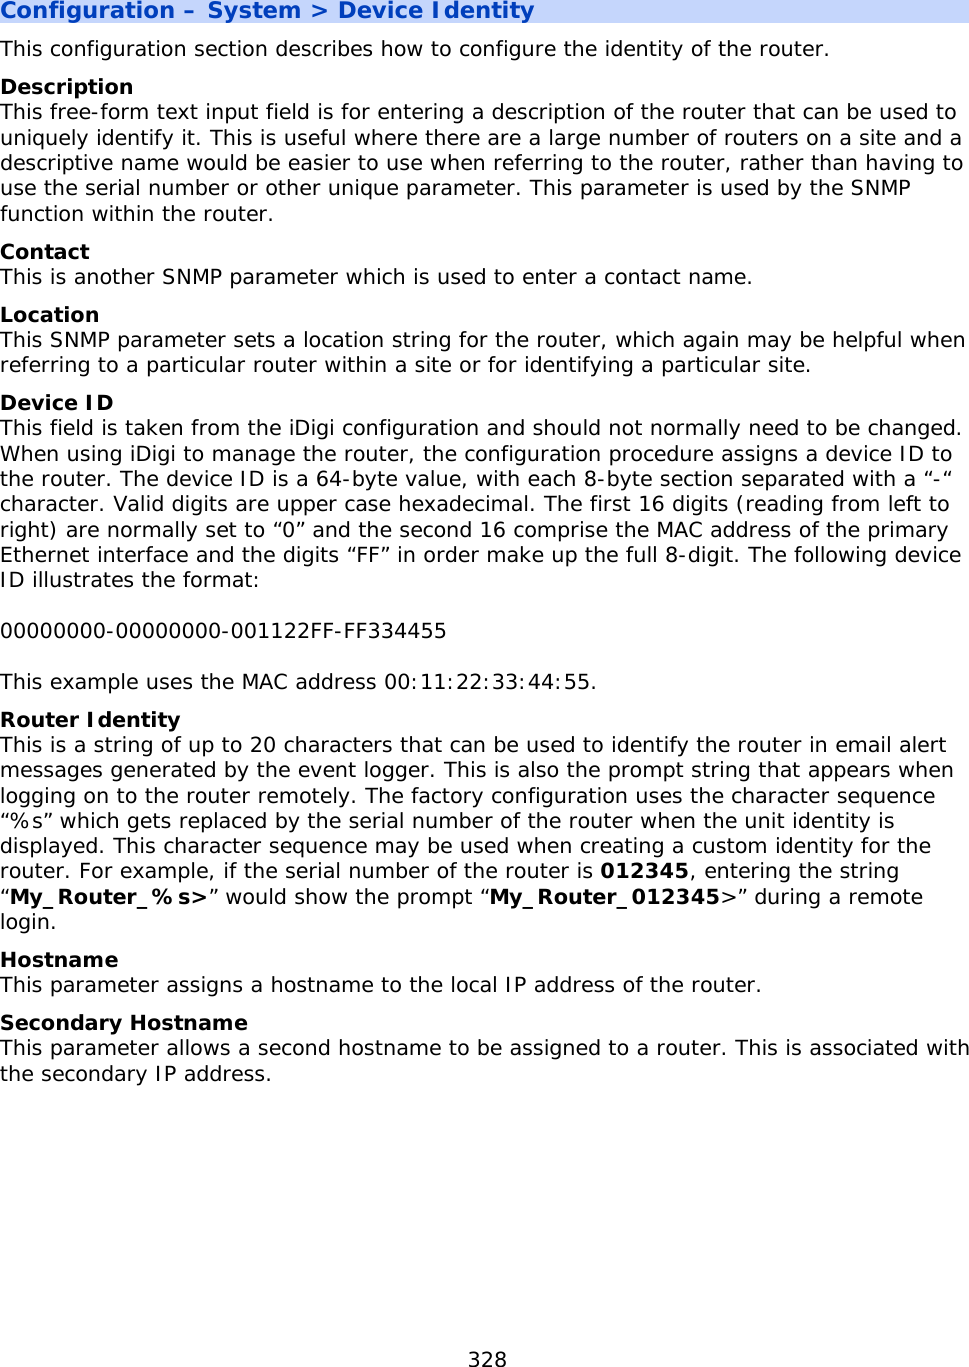 328  Configuration – System &gt; Device Identity This configuration section describes how to configure the identity of the router.   Description This free-form text input field is for entering a description of the router that can be used to uniquely identify it. This is useful where there are a large number of routers on a site and a descriptive name would be easier to use when referring to the router, rather than having to use the serial number or other unique parameter. This parameter is used by the SNMP function within the router. Contact This is another SNMP parameter which is used to enter a contact name. Location This SNMP parameter sets a location string for the router, which again may be helpful when referring to a particular router within a site or for identifying a particular site. Device ID This field is taken from the iDigi configuration and should not normally need to be changed. When using iDigi to manage the router, the configuration procedure assigns a device ID to the router. The device ID is a 64-byte value, with each 8-byte section separated with a “-“ character. Valid digits are upper case hexadecimal. The first 16 digits (reading from left to right) are normally set to “0” and the second 16 comprise the MAC address of the primary Ethernet interface and the digits “FF” in order make up the full 8-digit. The following device ID illustrates the format:  00000000-00000000-001122FF-FF334455  This example uses the MAC address 00:11:22:33:44:55. Router Identity This is a string of up to 20 characters that can be used to identify the router in email alert messages generated by the event logger. This is also the prompt string that appears when logging on to the router remotely. The factory configuration uses the character sequence “%s” which gets replaced by the serial number of the router when the unit identity is displayed. This character sequence may be used when creating a custom identity for the router. For example, if the serial number of the router is 012345, entering the string “My_Router_%s&gt;” would show the prompt “My_Router_012345&gt;” during a remote login. Hostname This parameter assigns a hostname to the local IP address of the router. Secondary Hostname This parameter allows a second hostname to be assigned to a router. This is associated with the secondary IP address.    